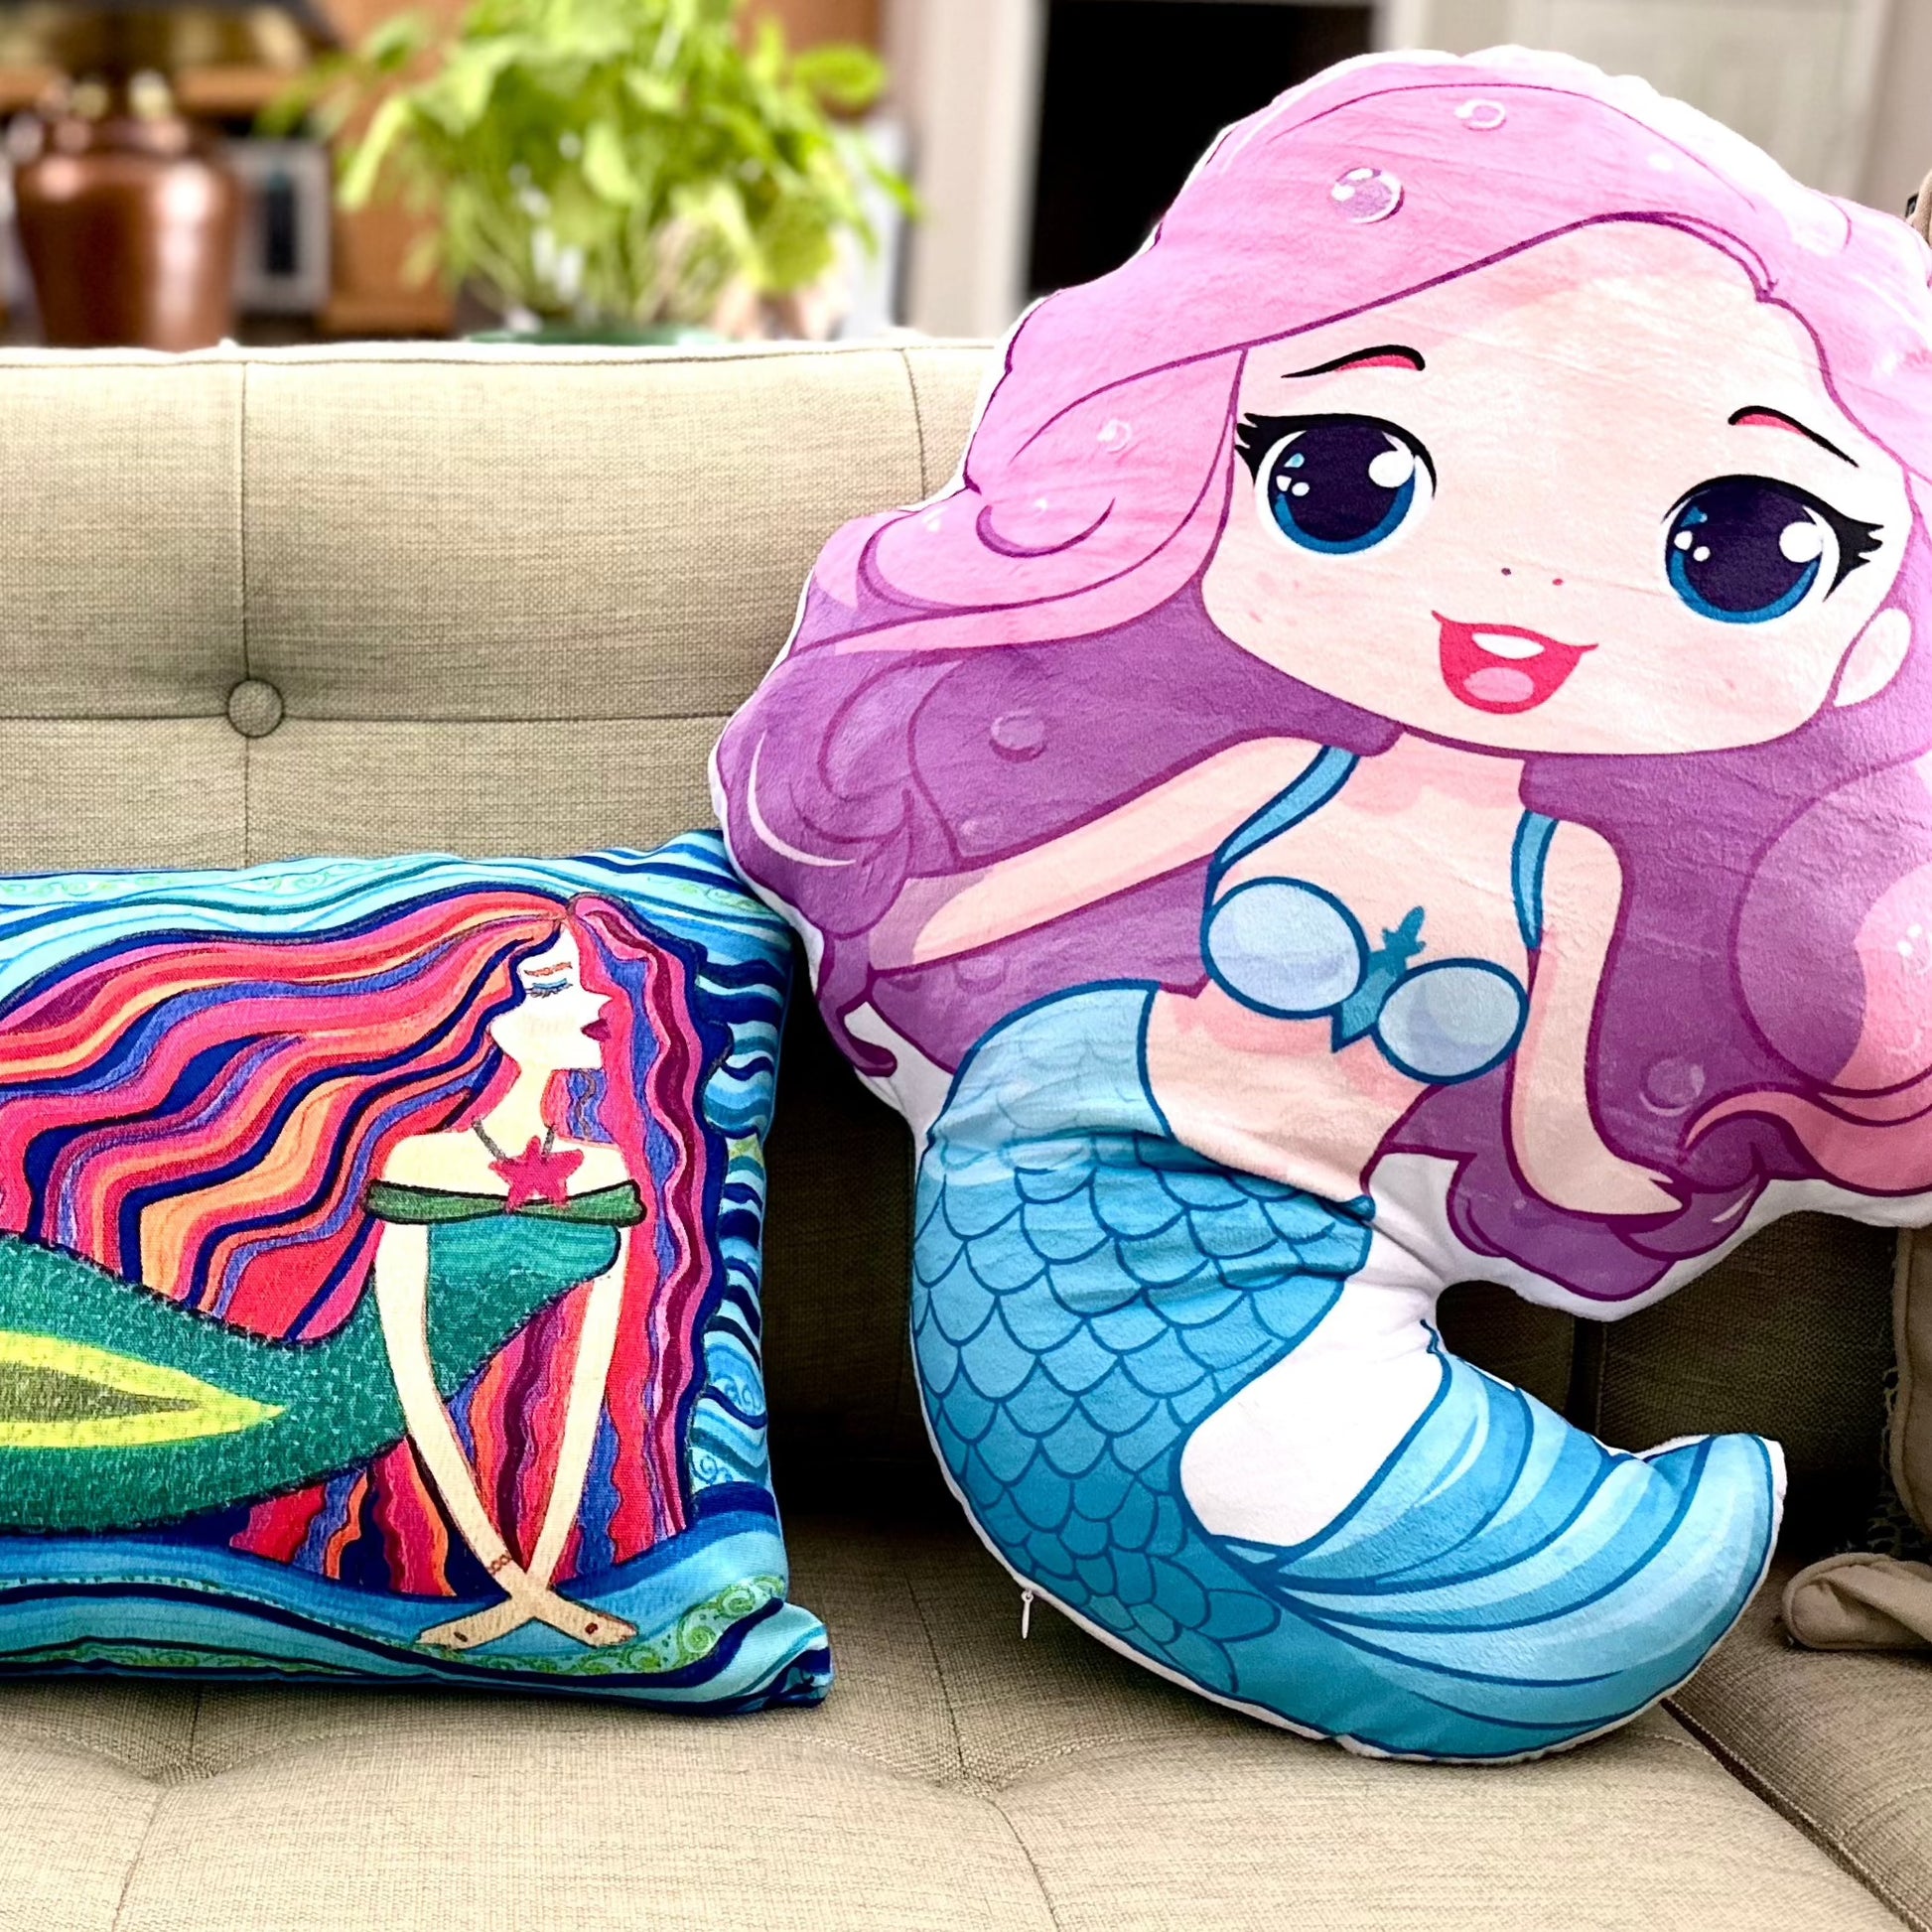 Suzie mermaid girl is wearing a light blue skirt/tail and top - pink long swingy hair and blue big sweet eyes - a cuddle-buddy pillow doll in 4 sizes up to 28 inches tall - minky soft and comforting to cuddle - small is perfect for traveling as a comfort-buddy that will start conversations yes! So fun!